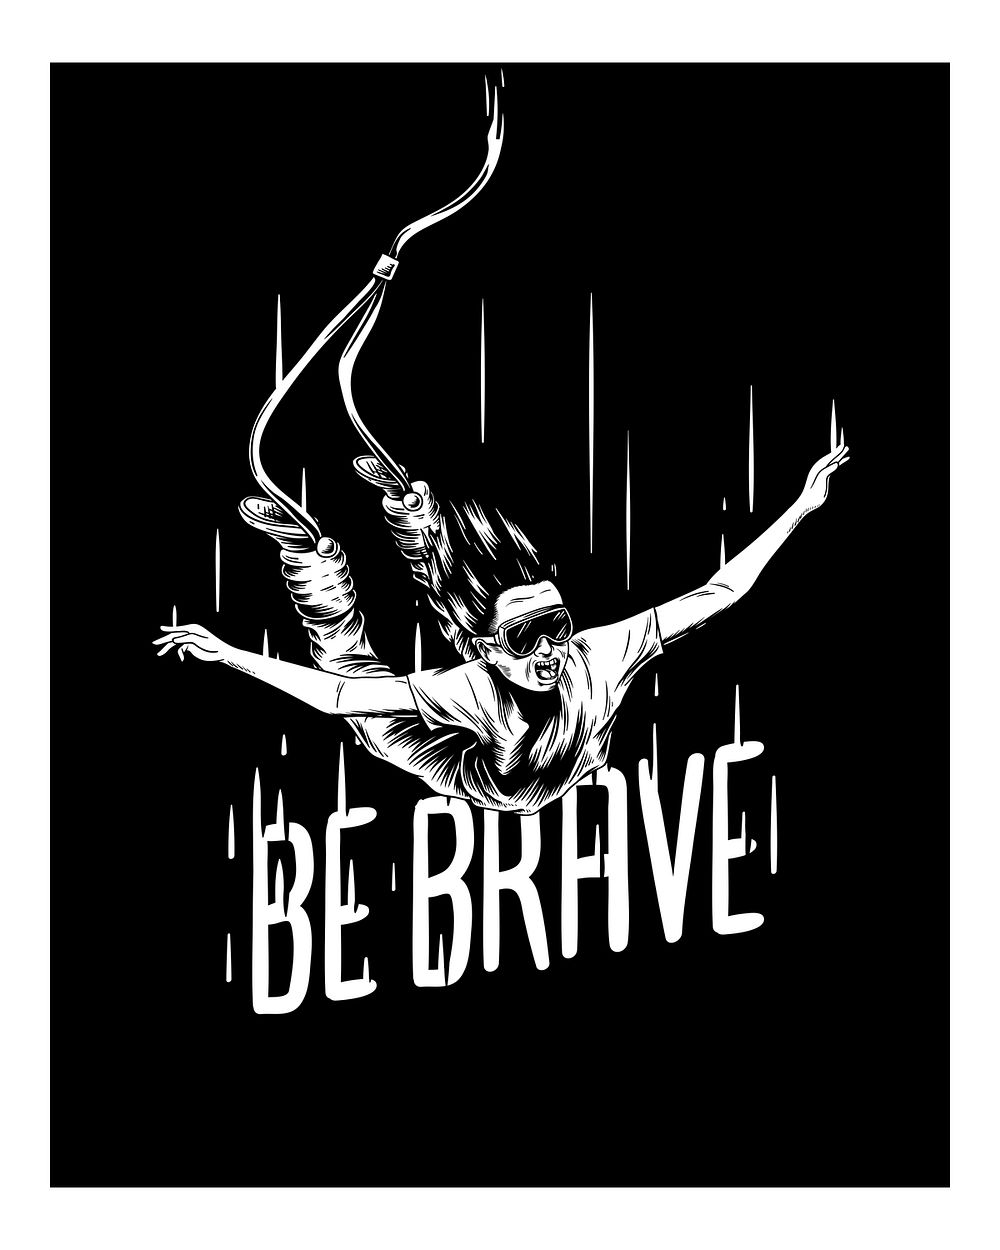 Be brave illustration wall art print and poster.